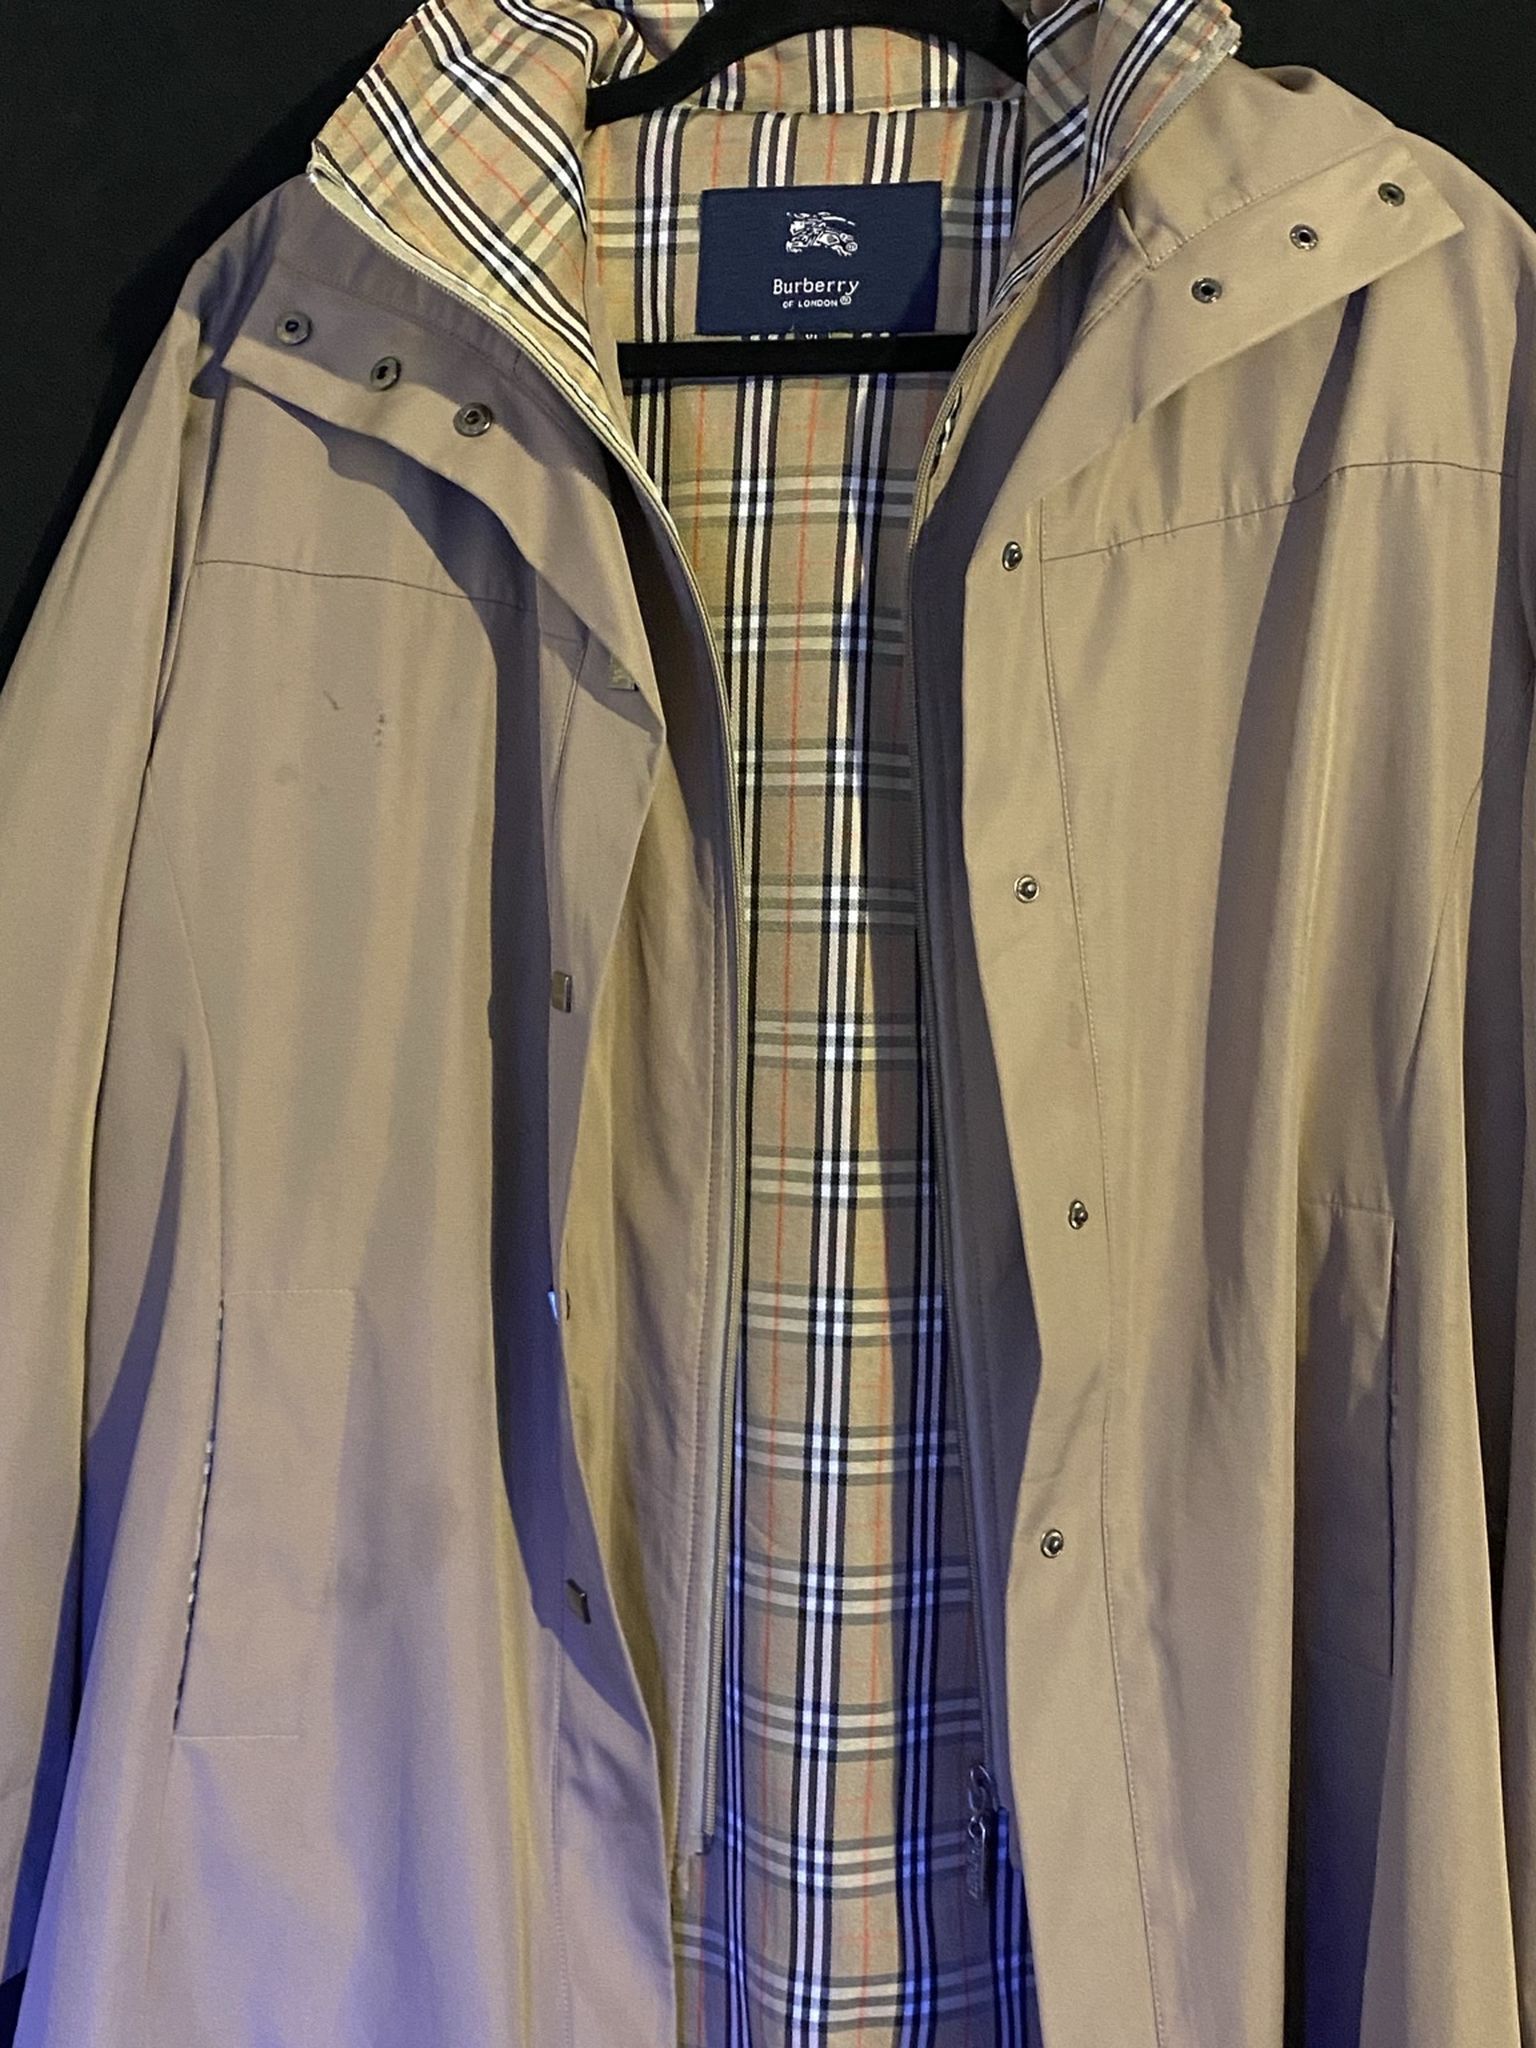 Burberry Trench Coat ~ SZ: X-L Great Condition